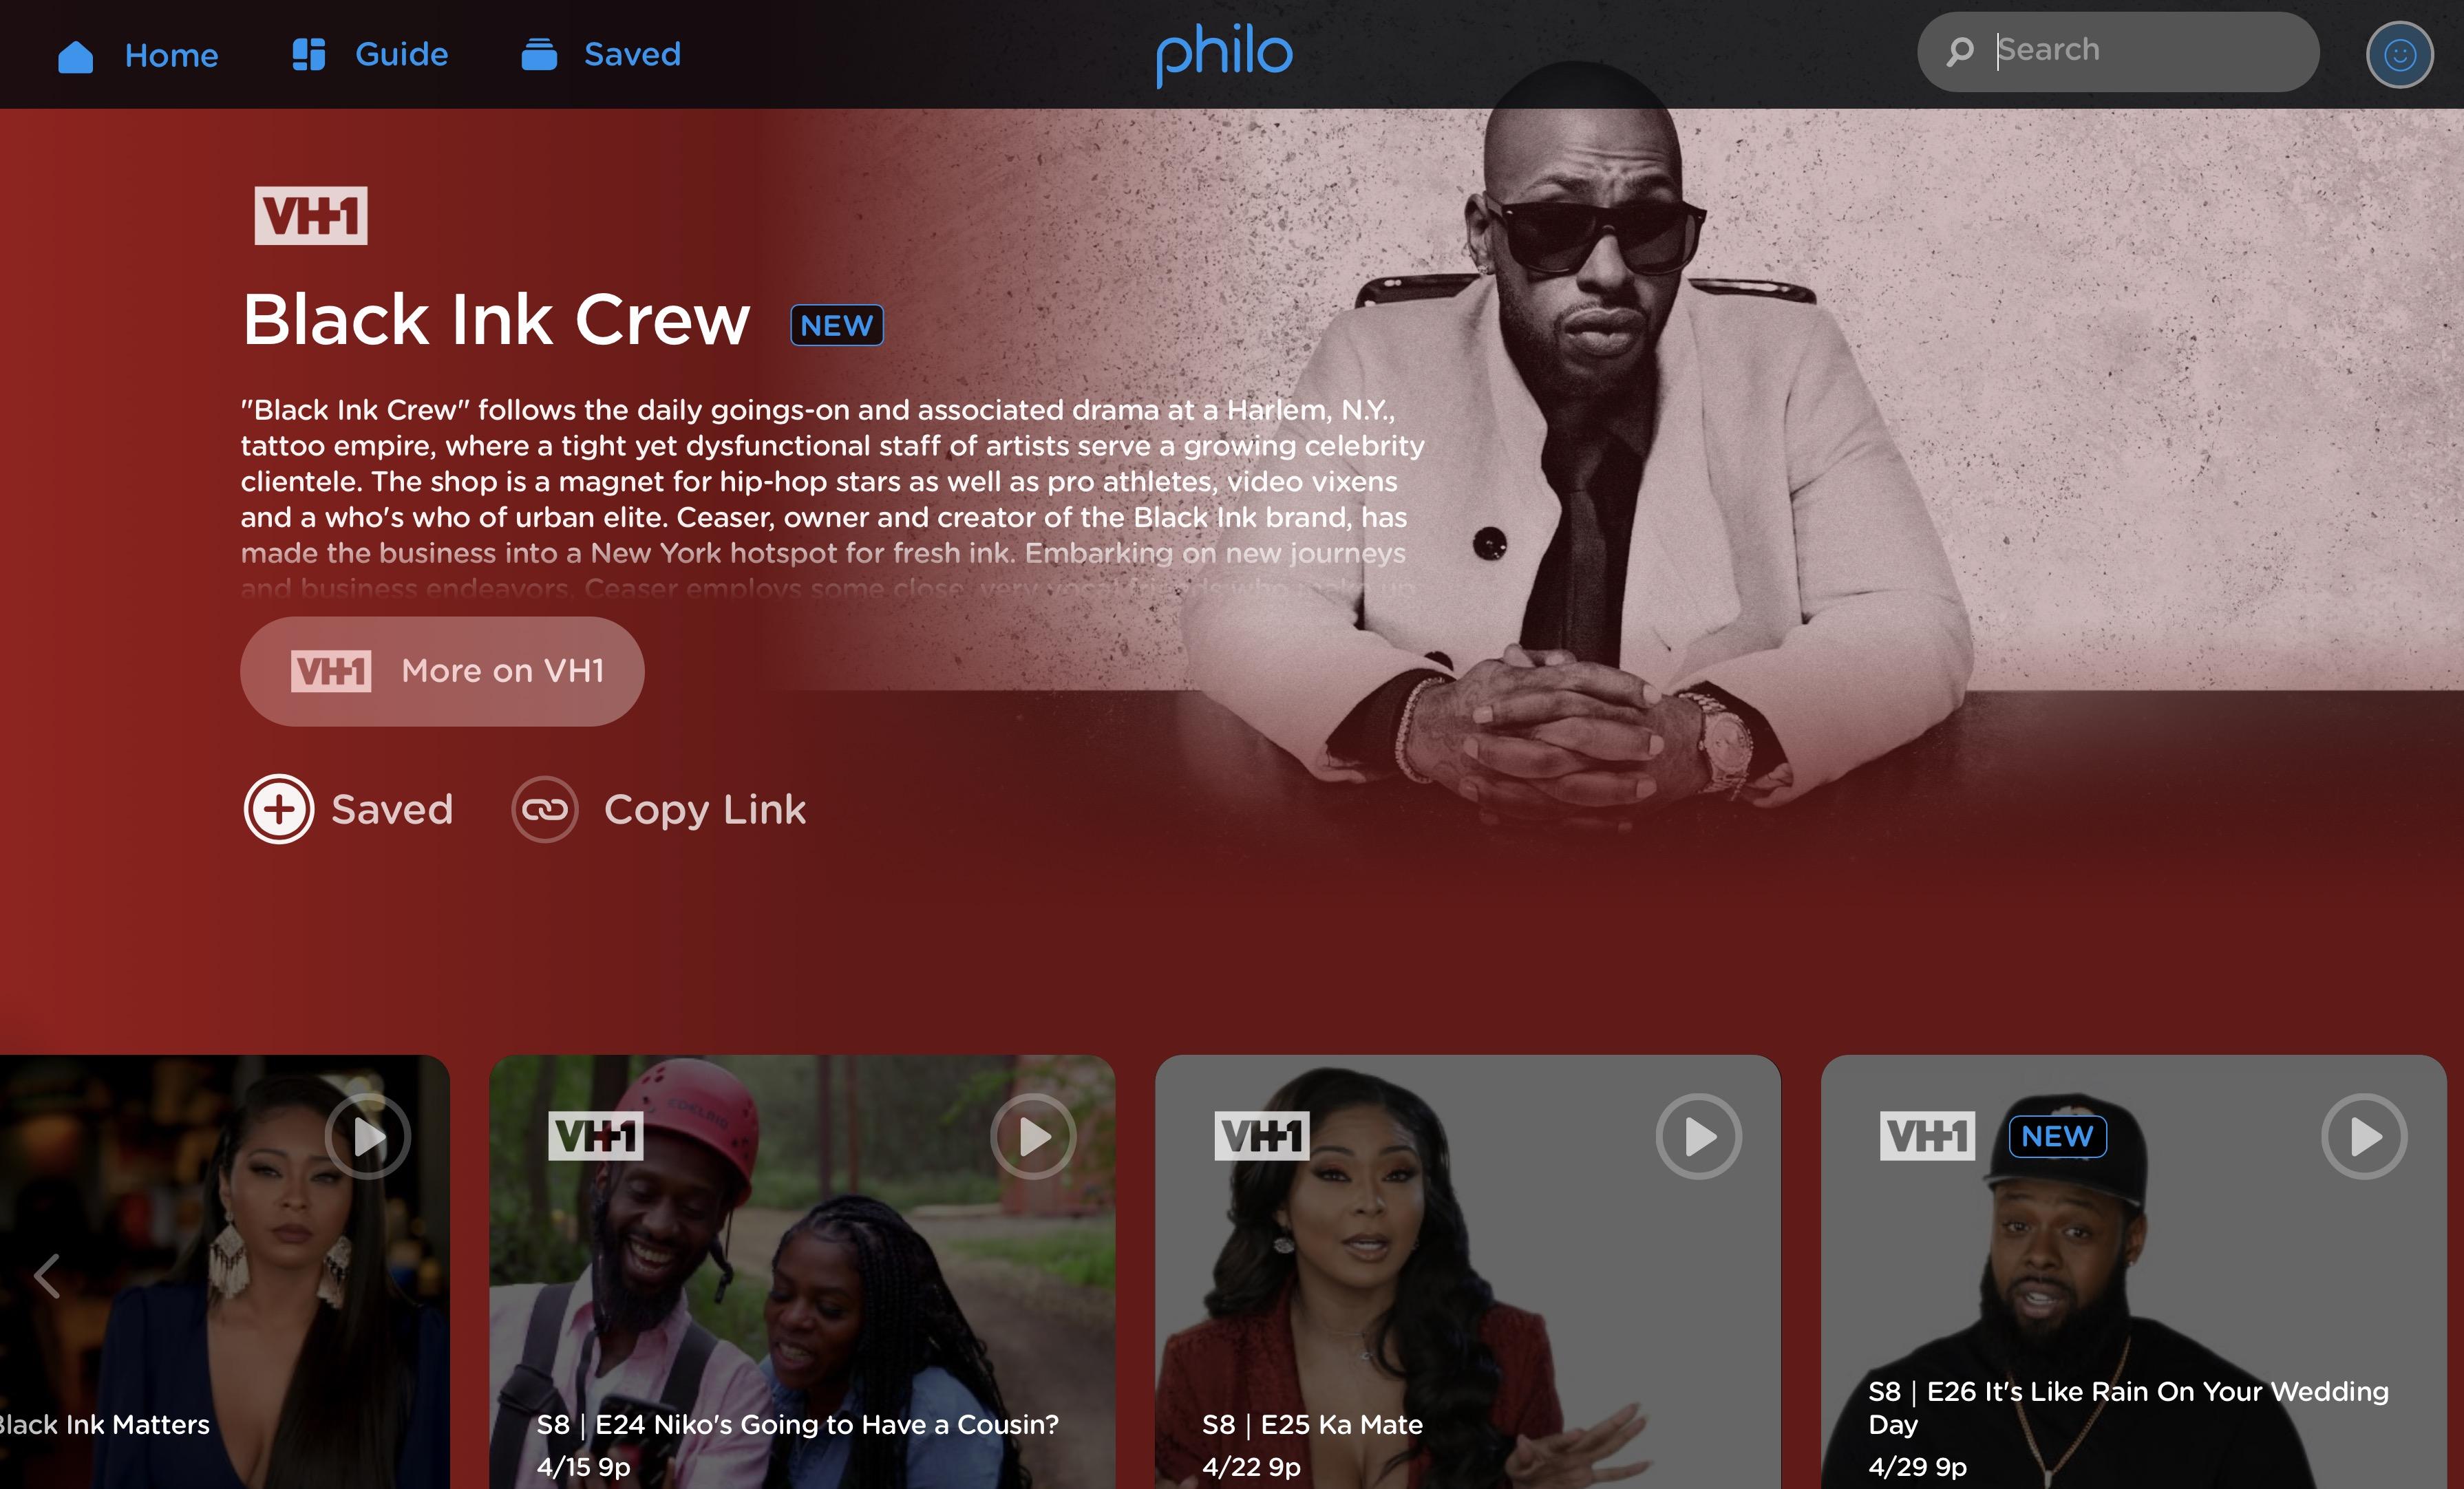 'Screenshot, Philo Show Guide for "Black Ink Crew" on Web'